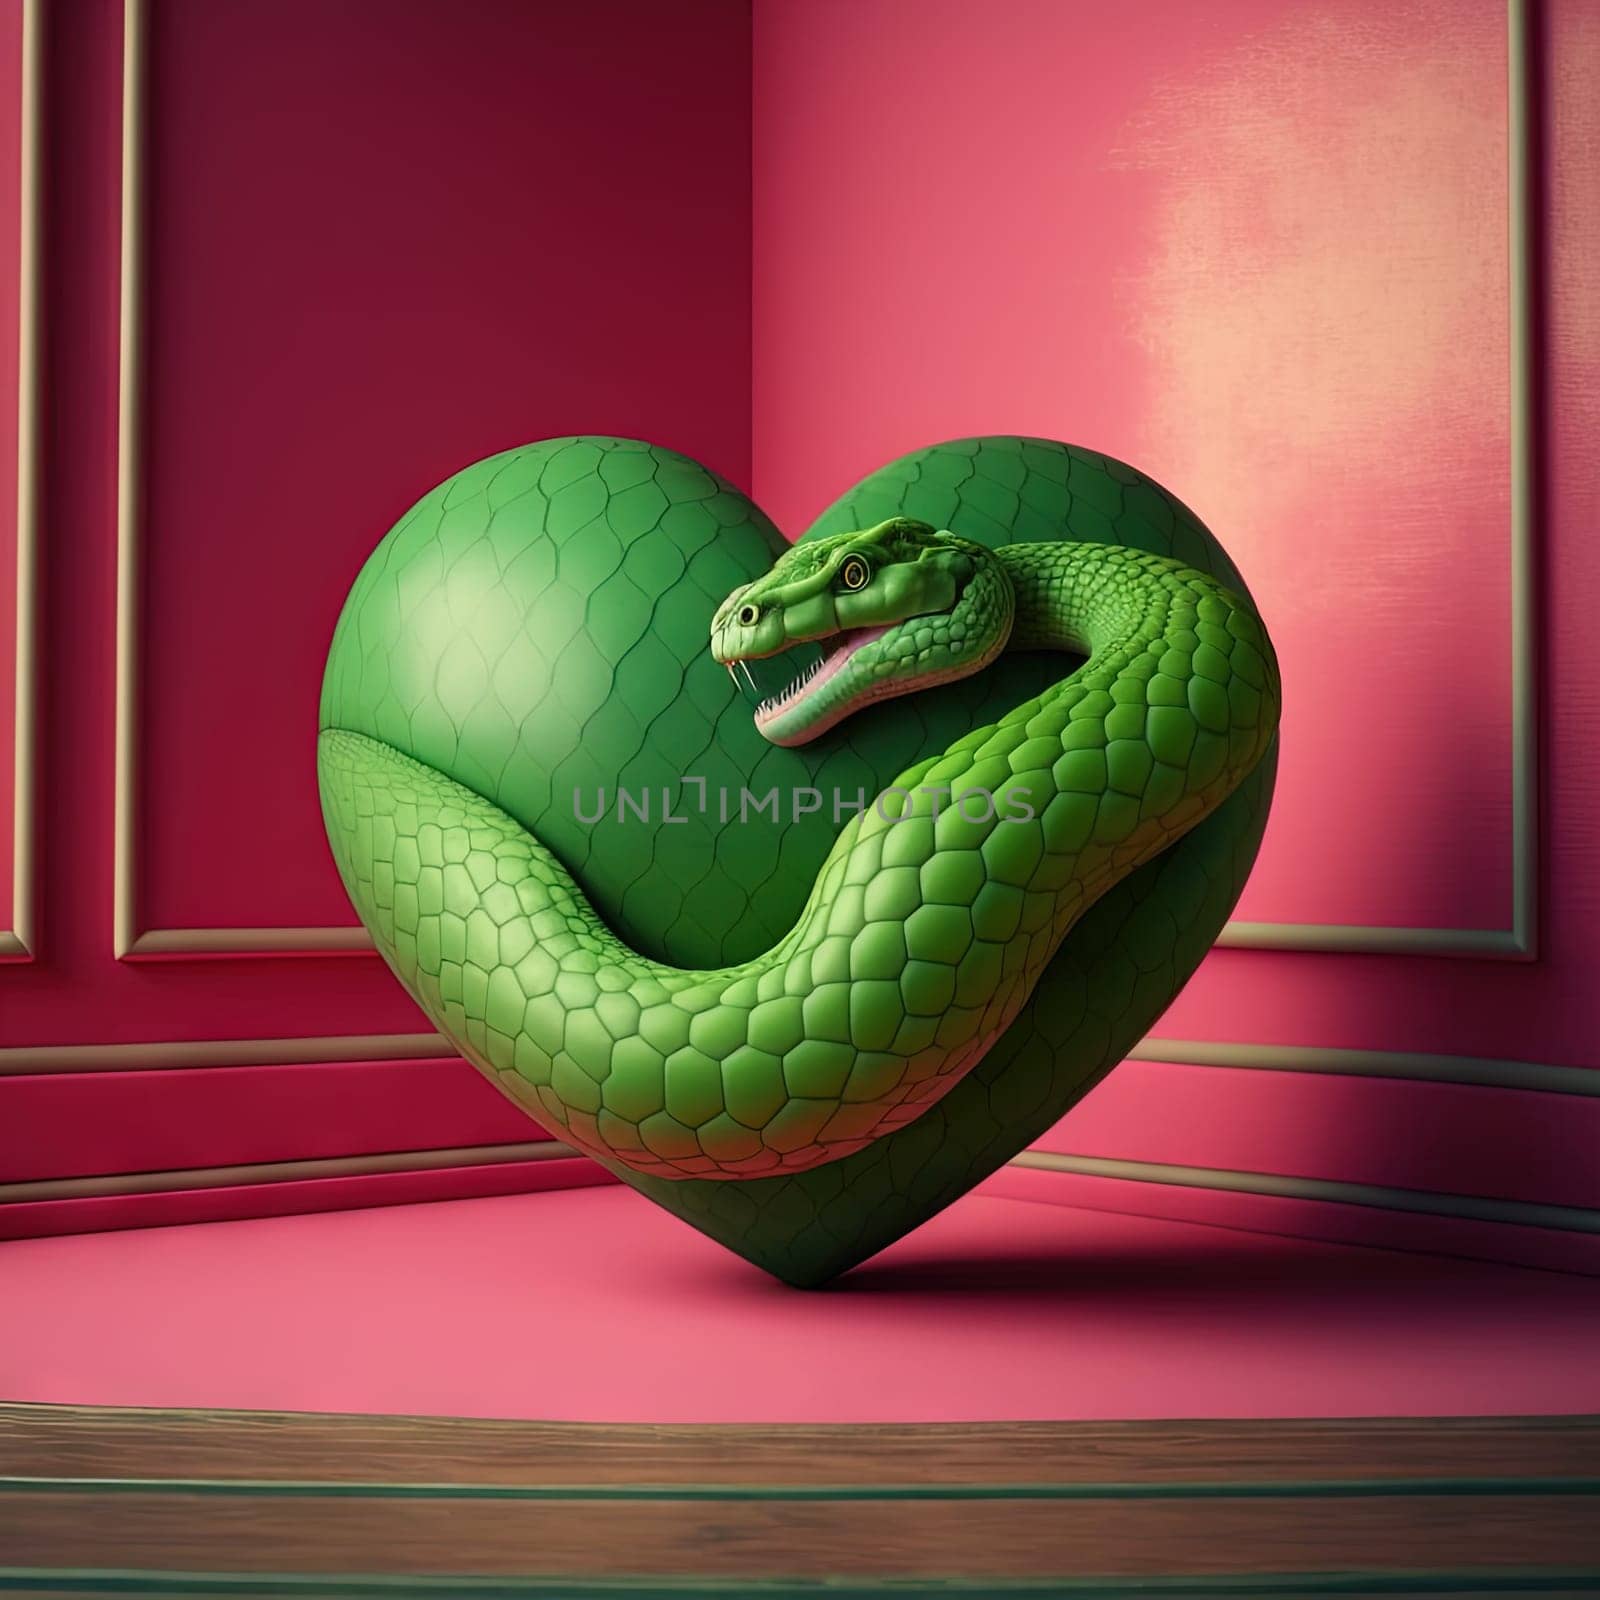 Snake in the shape of heart. Love and relationships symbol for tricky Valentine's Day card. Playful or abusive relationships concept by SwillKch